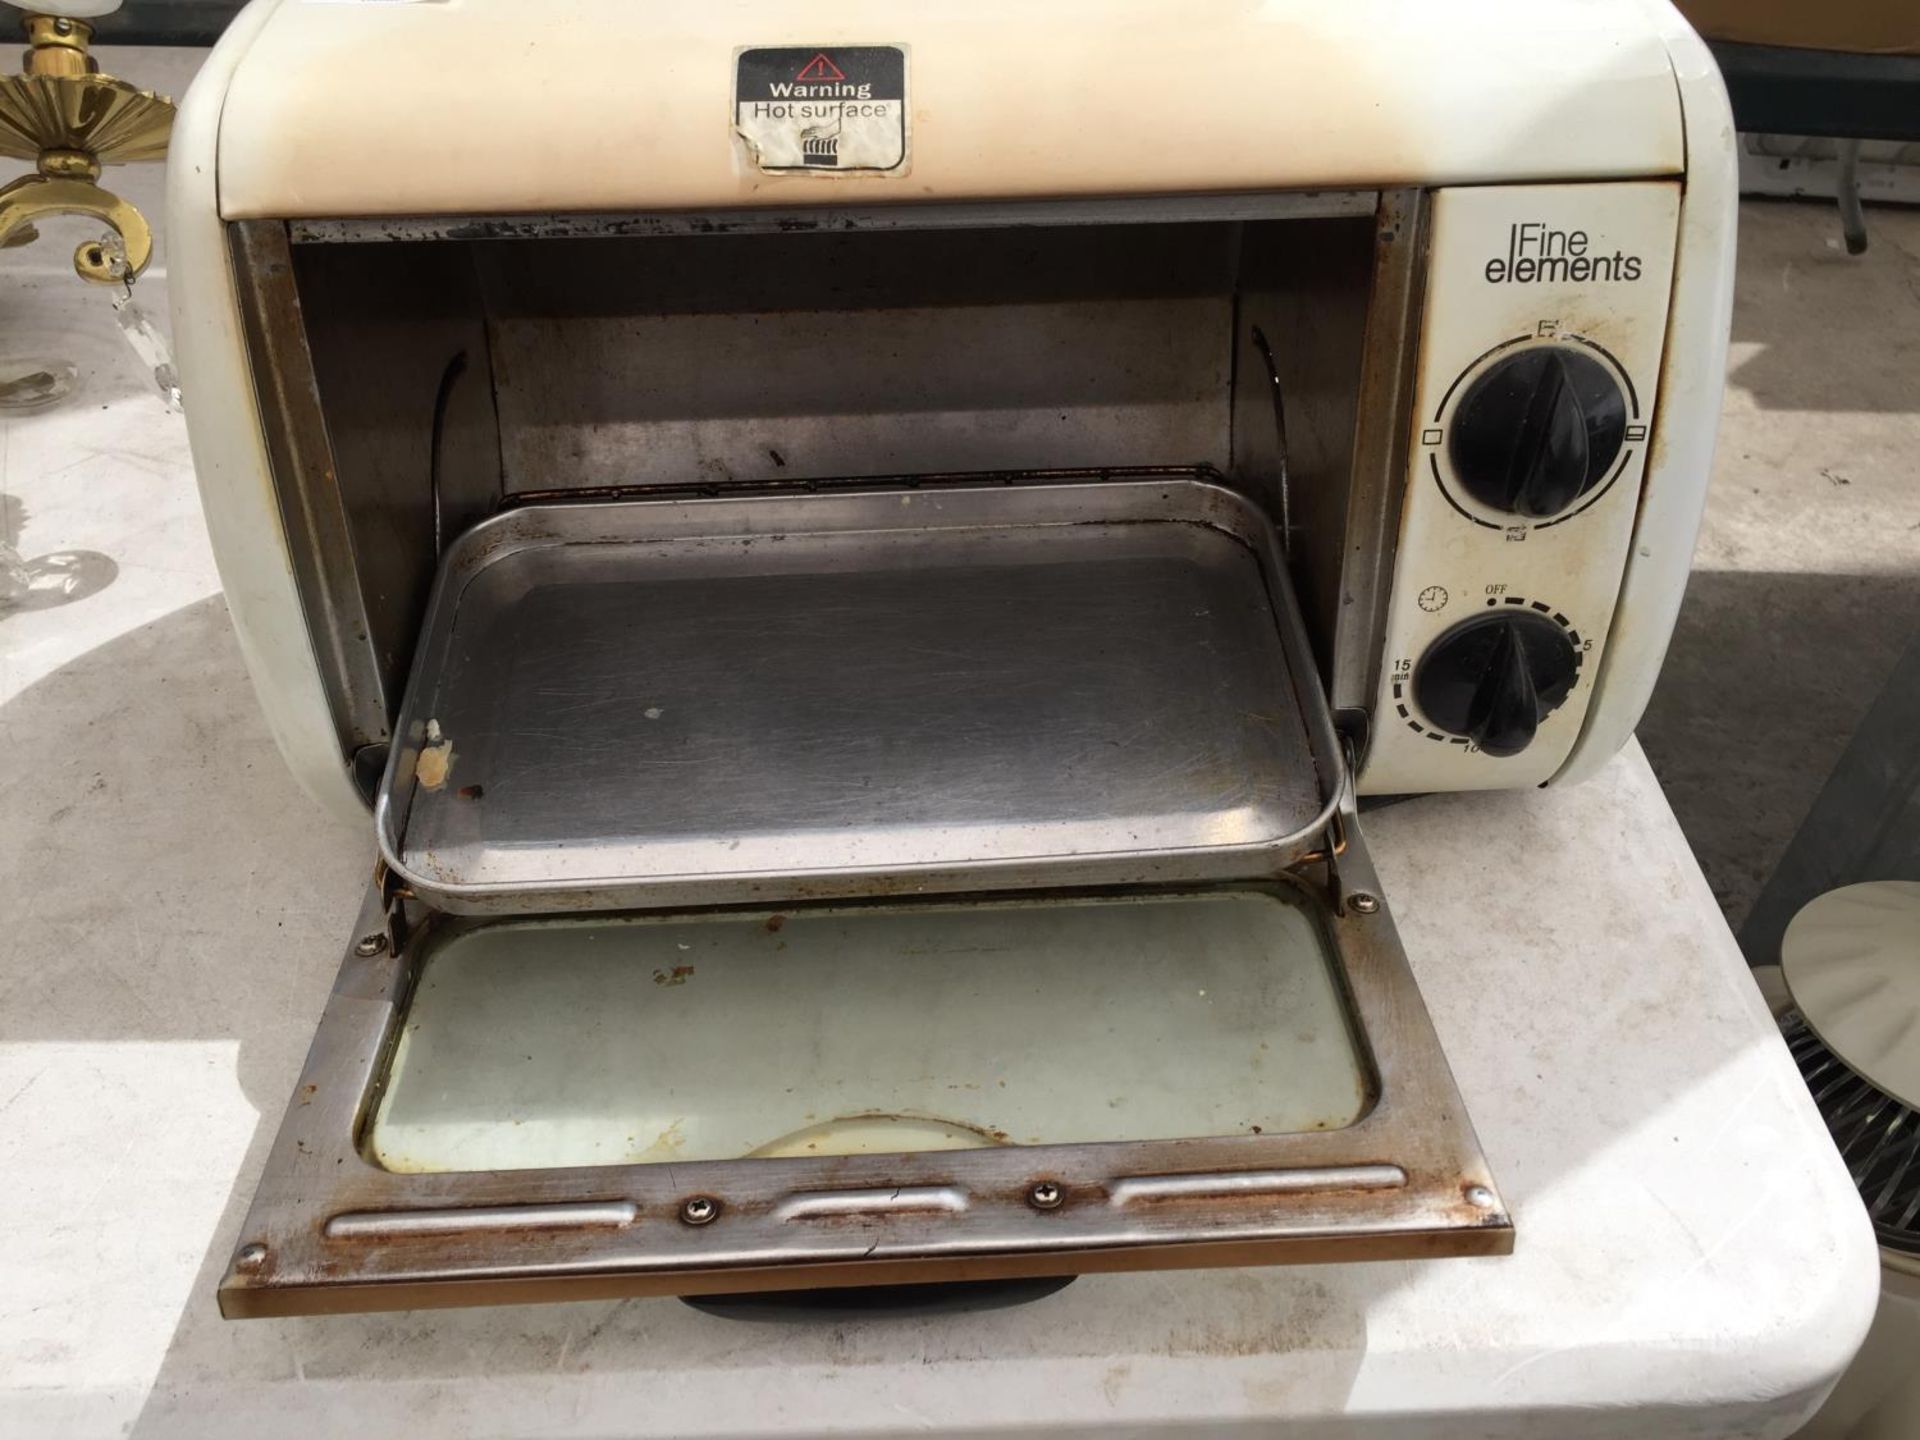 A FINE ELEMENTS TOASTER OVEN - Image 2 of 2